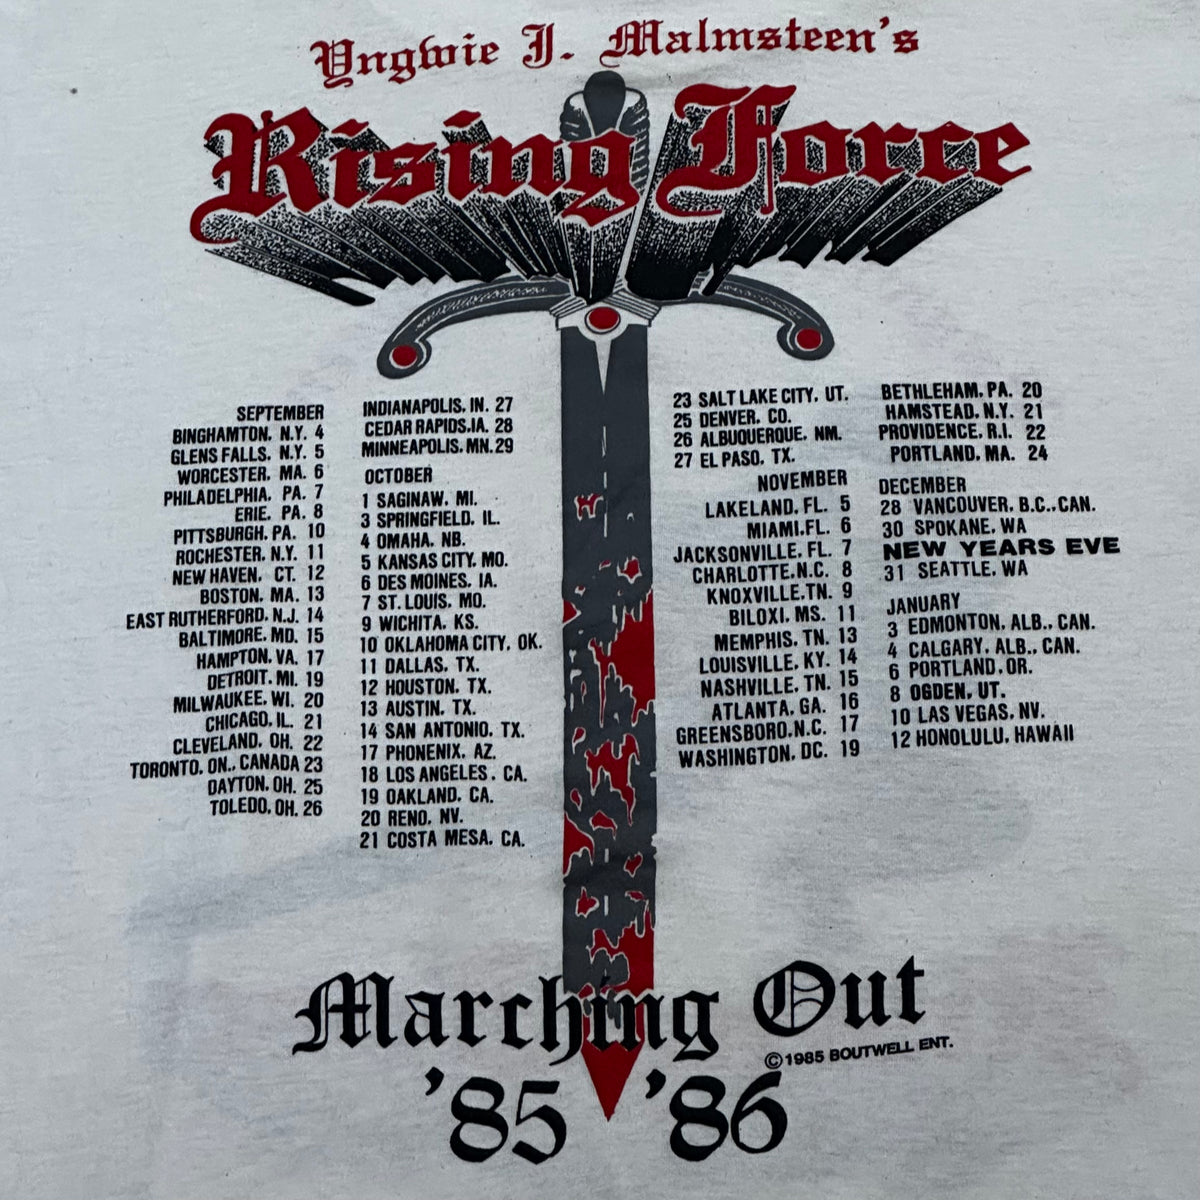 1985 Vintage Yngwie Malmsteen Rising Force tour shirt